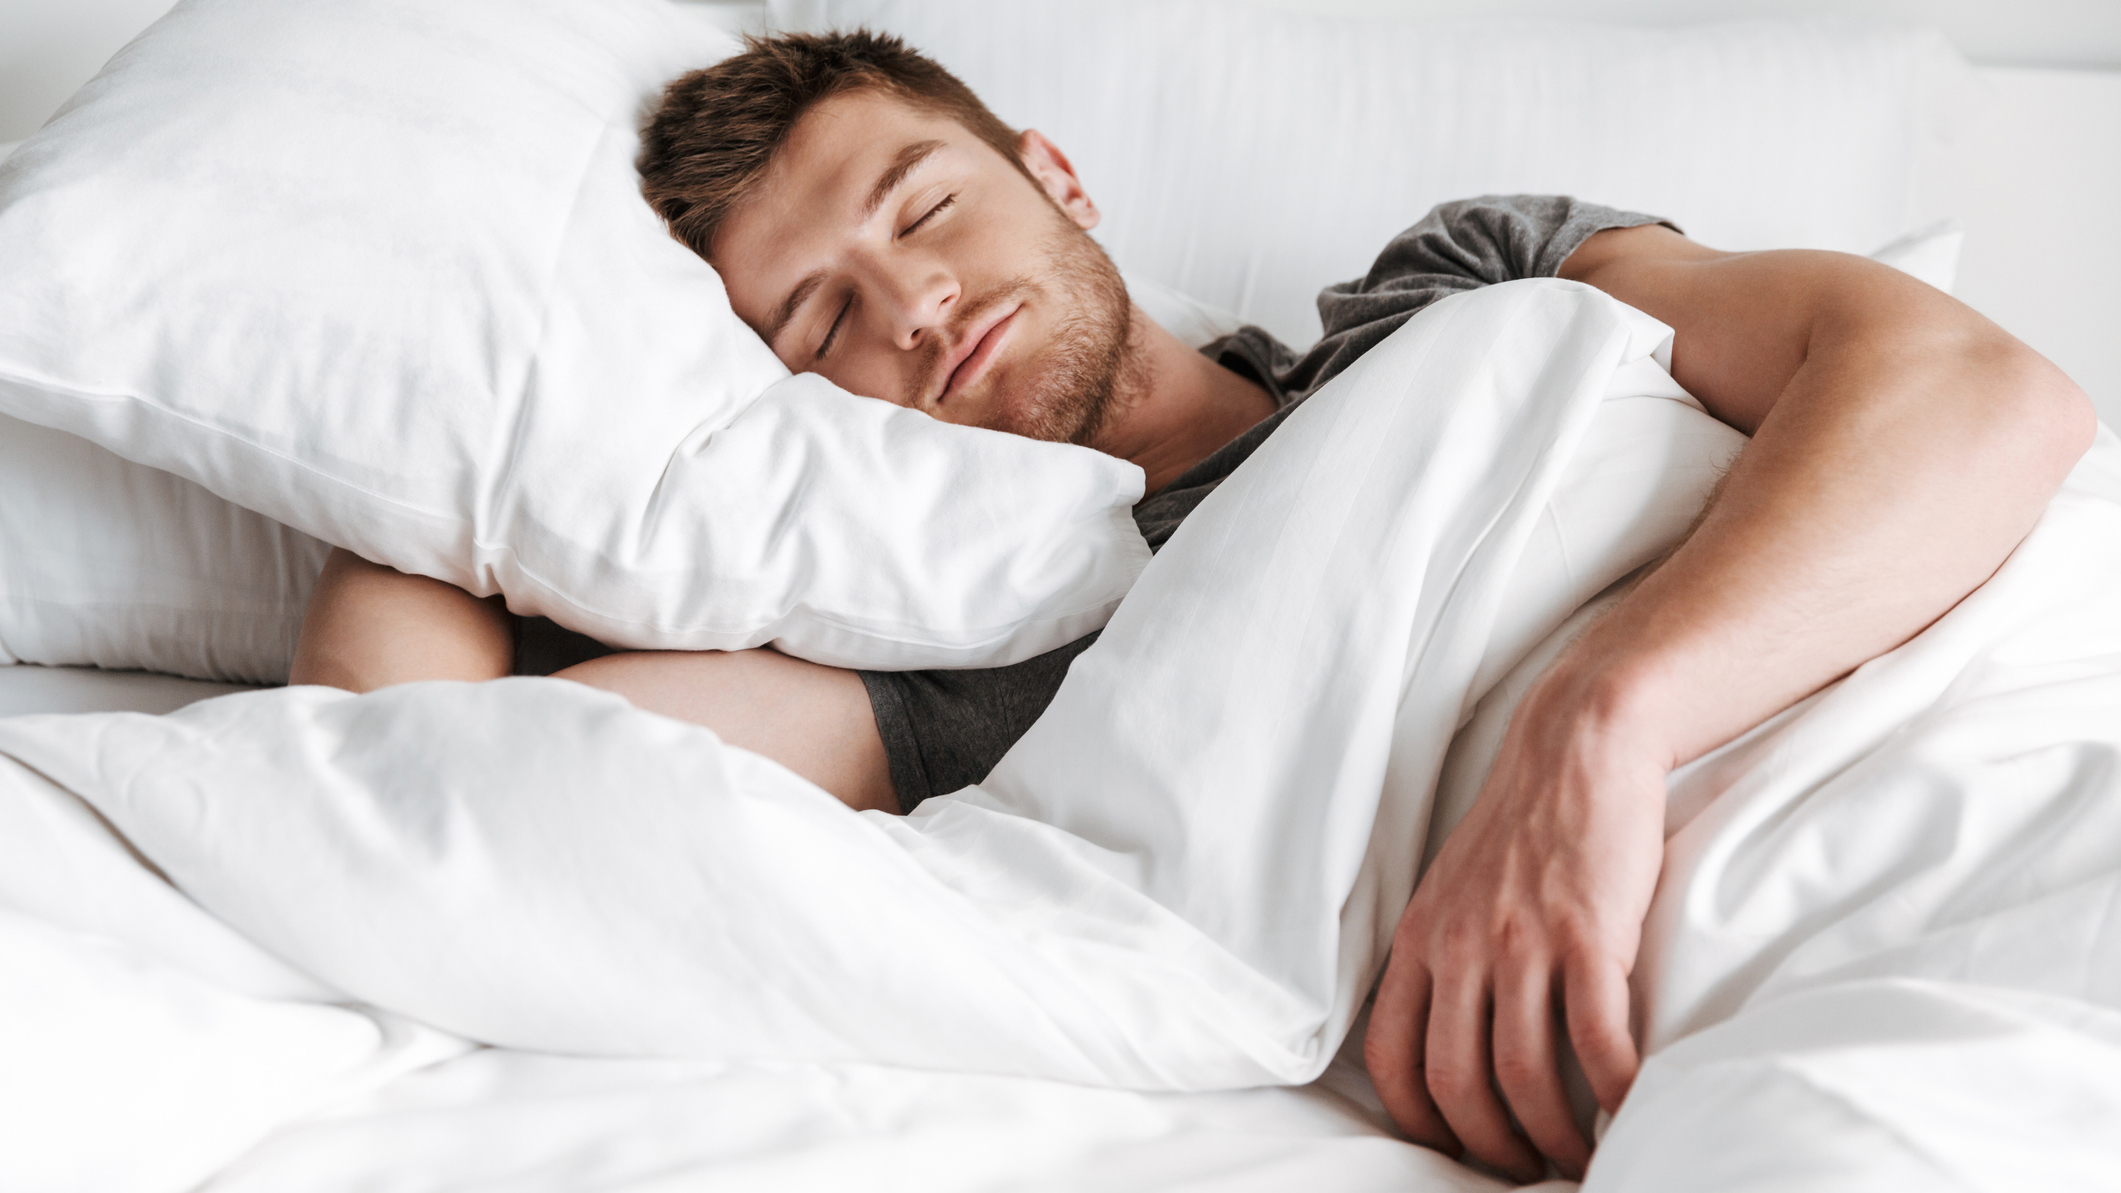 A man with short brown hair sleeps comfortably in a white bed